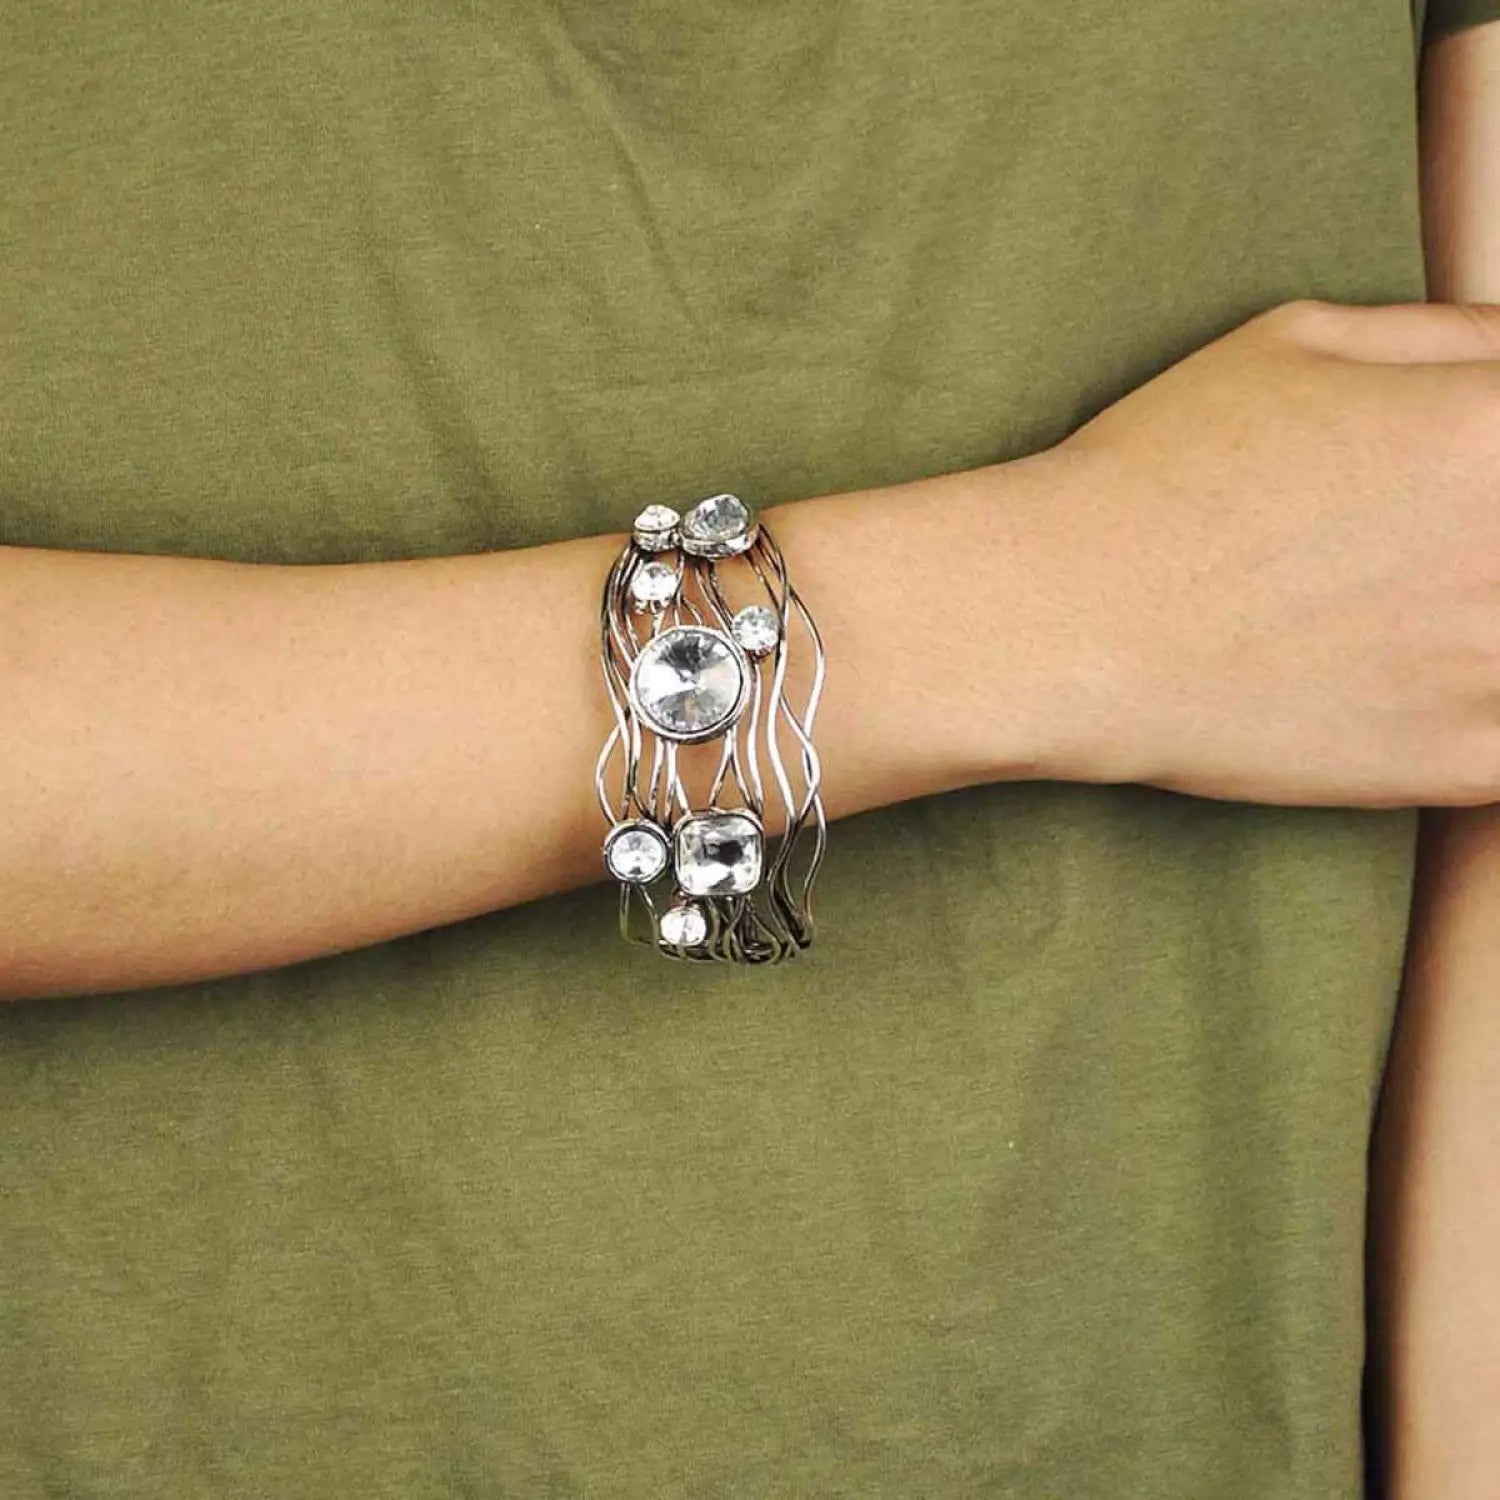 Woman wearing multi-layered statement bracelet with silver ring accent.